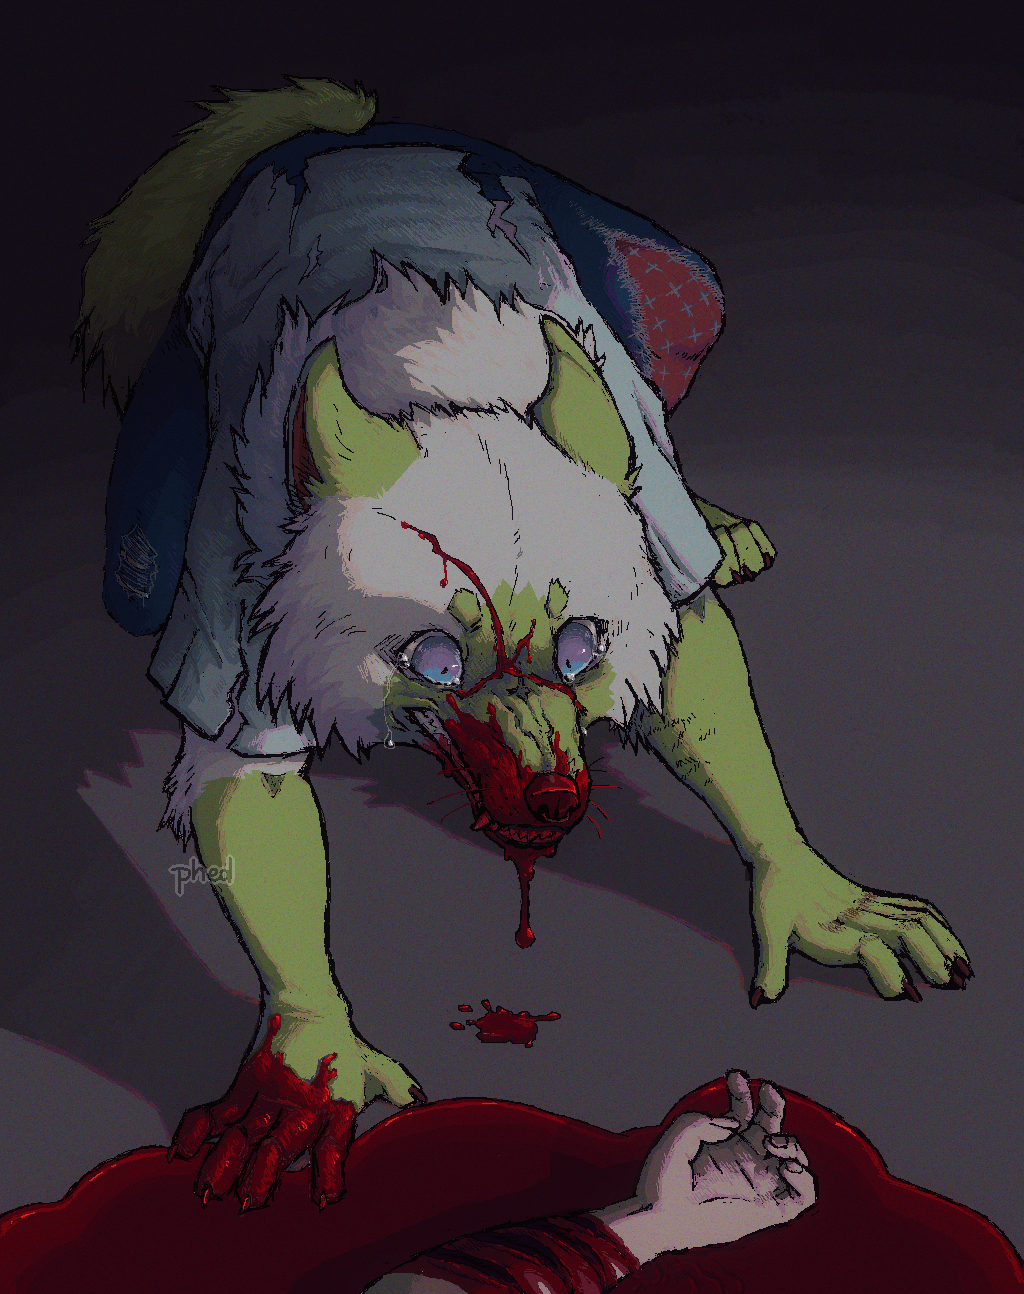 a drawing of Rozkurwiacz crouching beside a pool of blood. they have blood on their muzzle and right hand, and a bleeding cut across their face. they’re terrified and upset. the only visible part of the victim’s body is their left arm, which has extremely deep claw wounds.